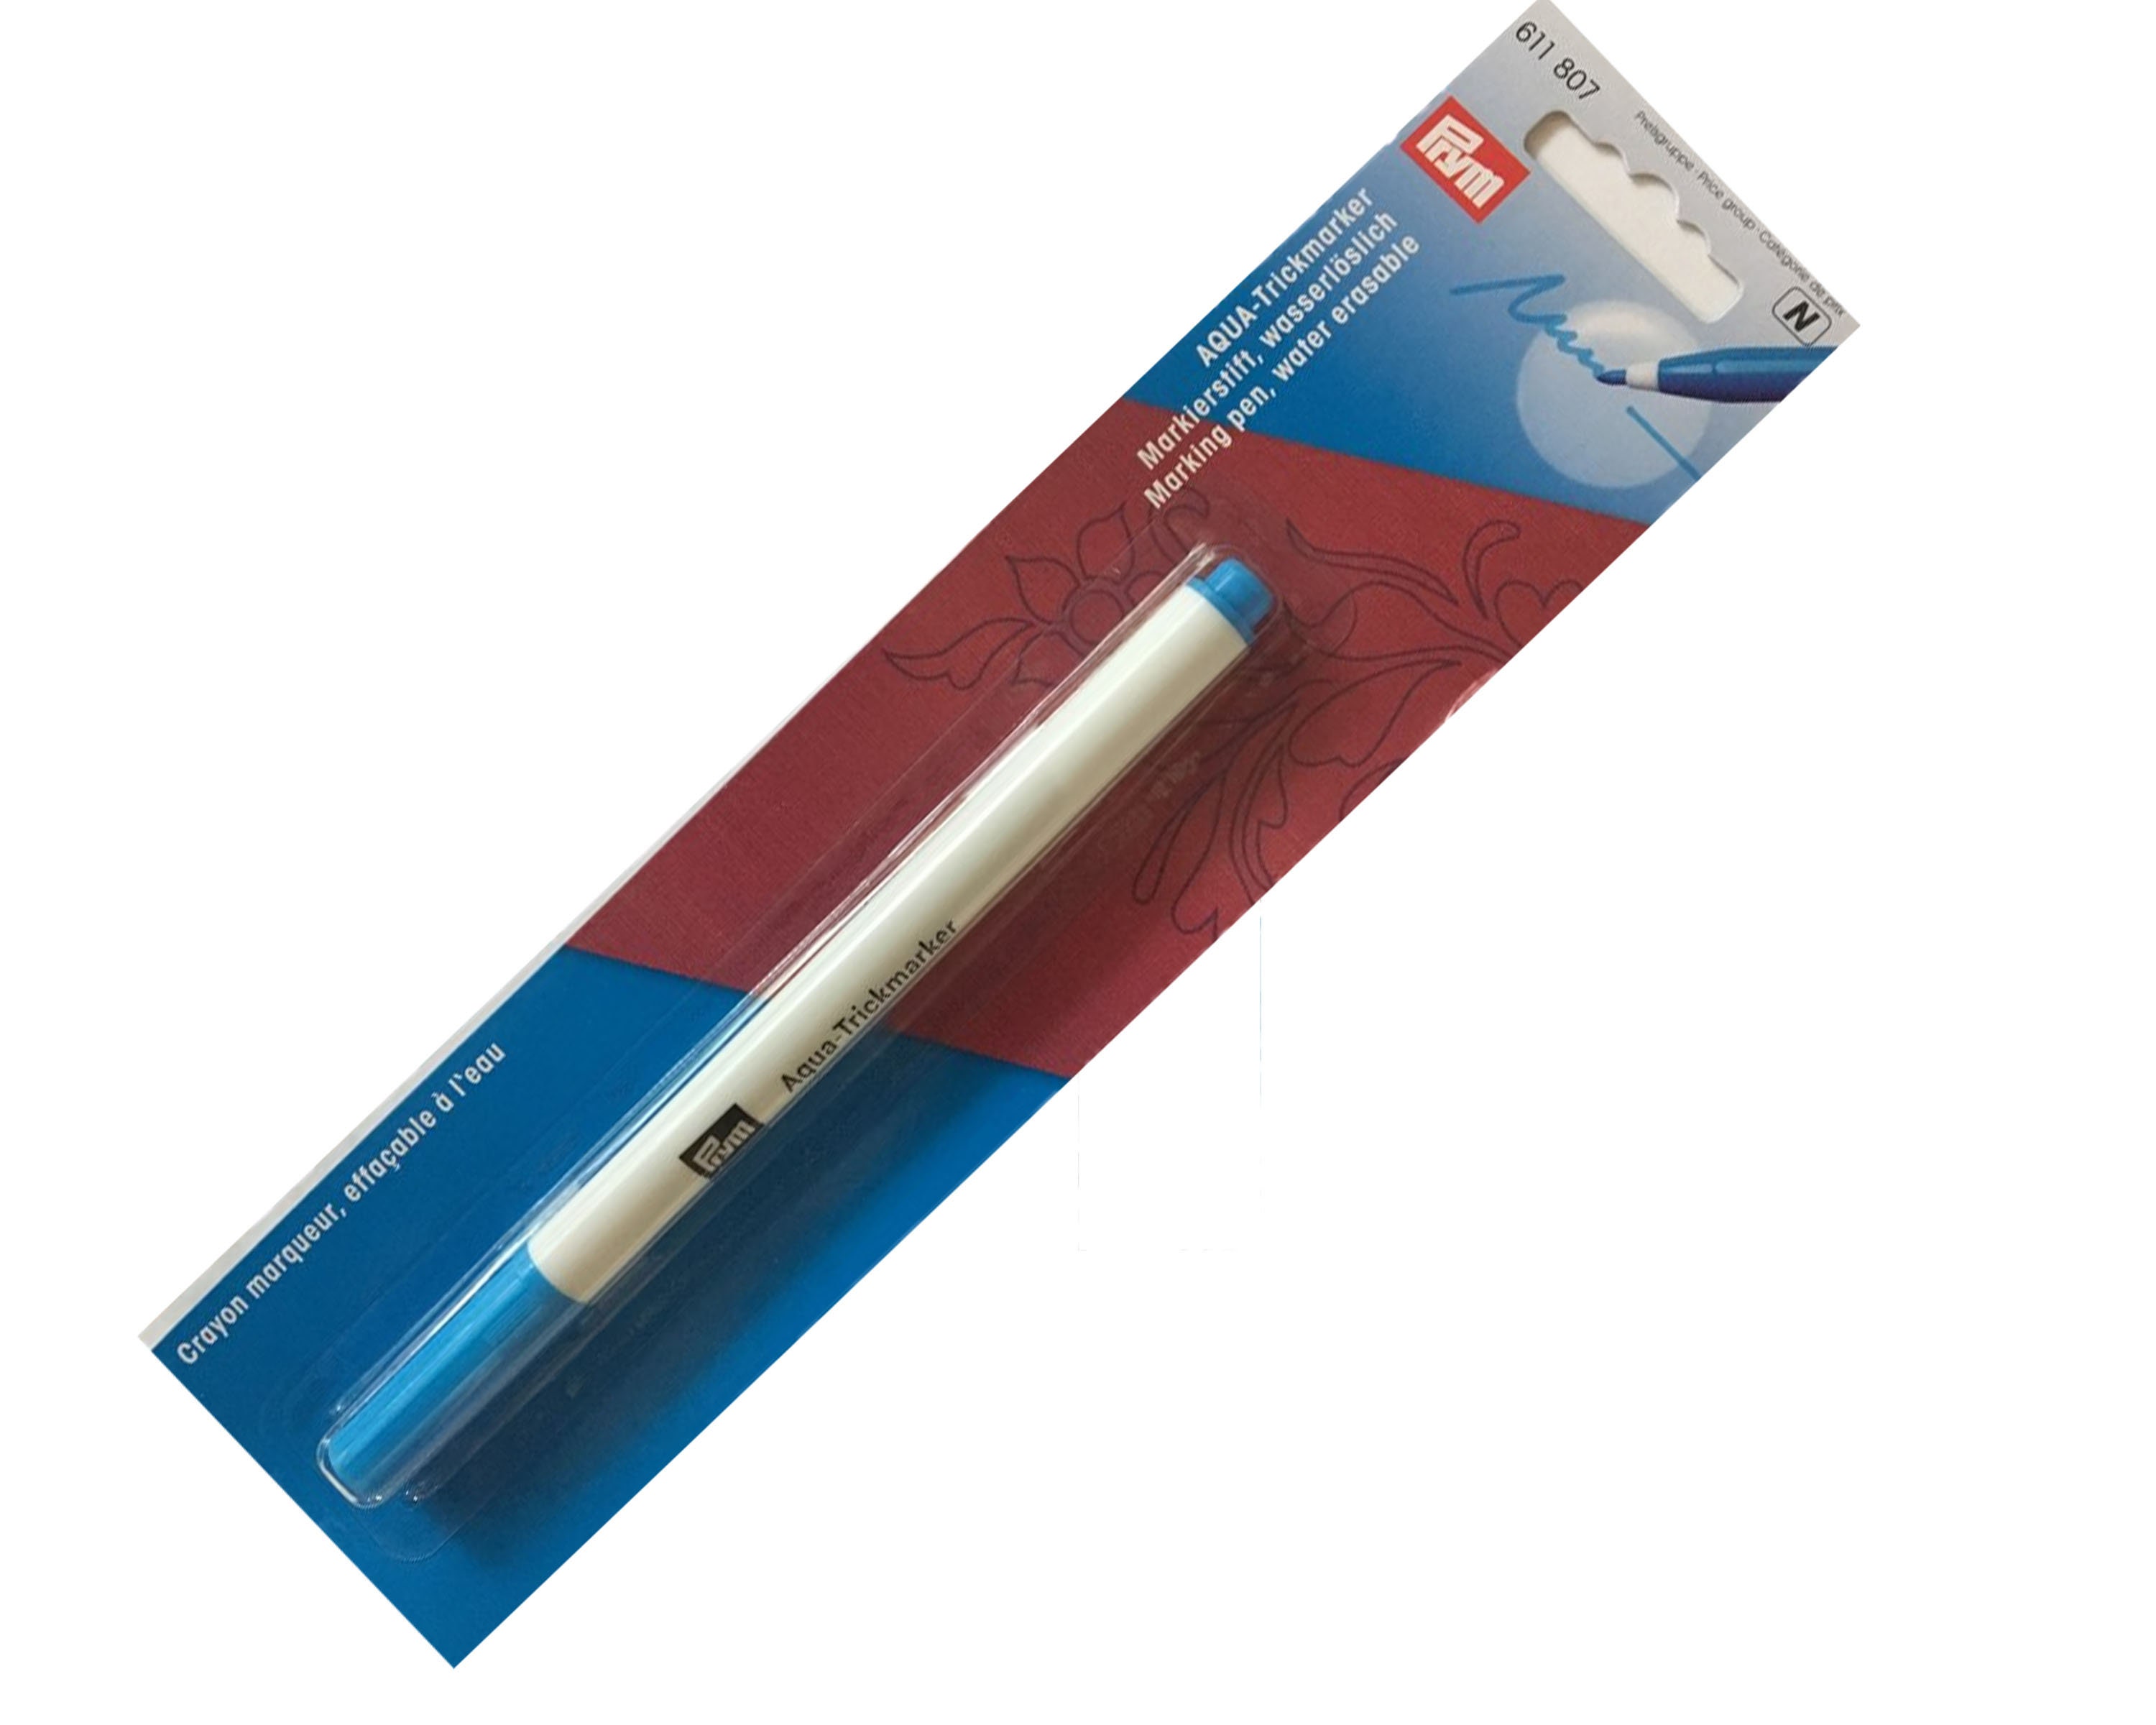 Prym Aqua Trickmarker, Water Soluble Pen, Sewing Accessory for